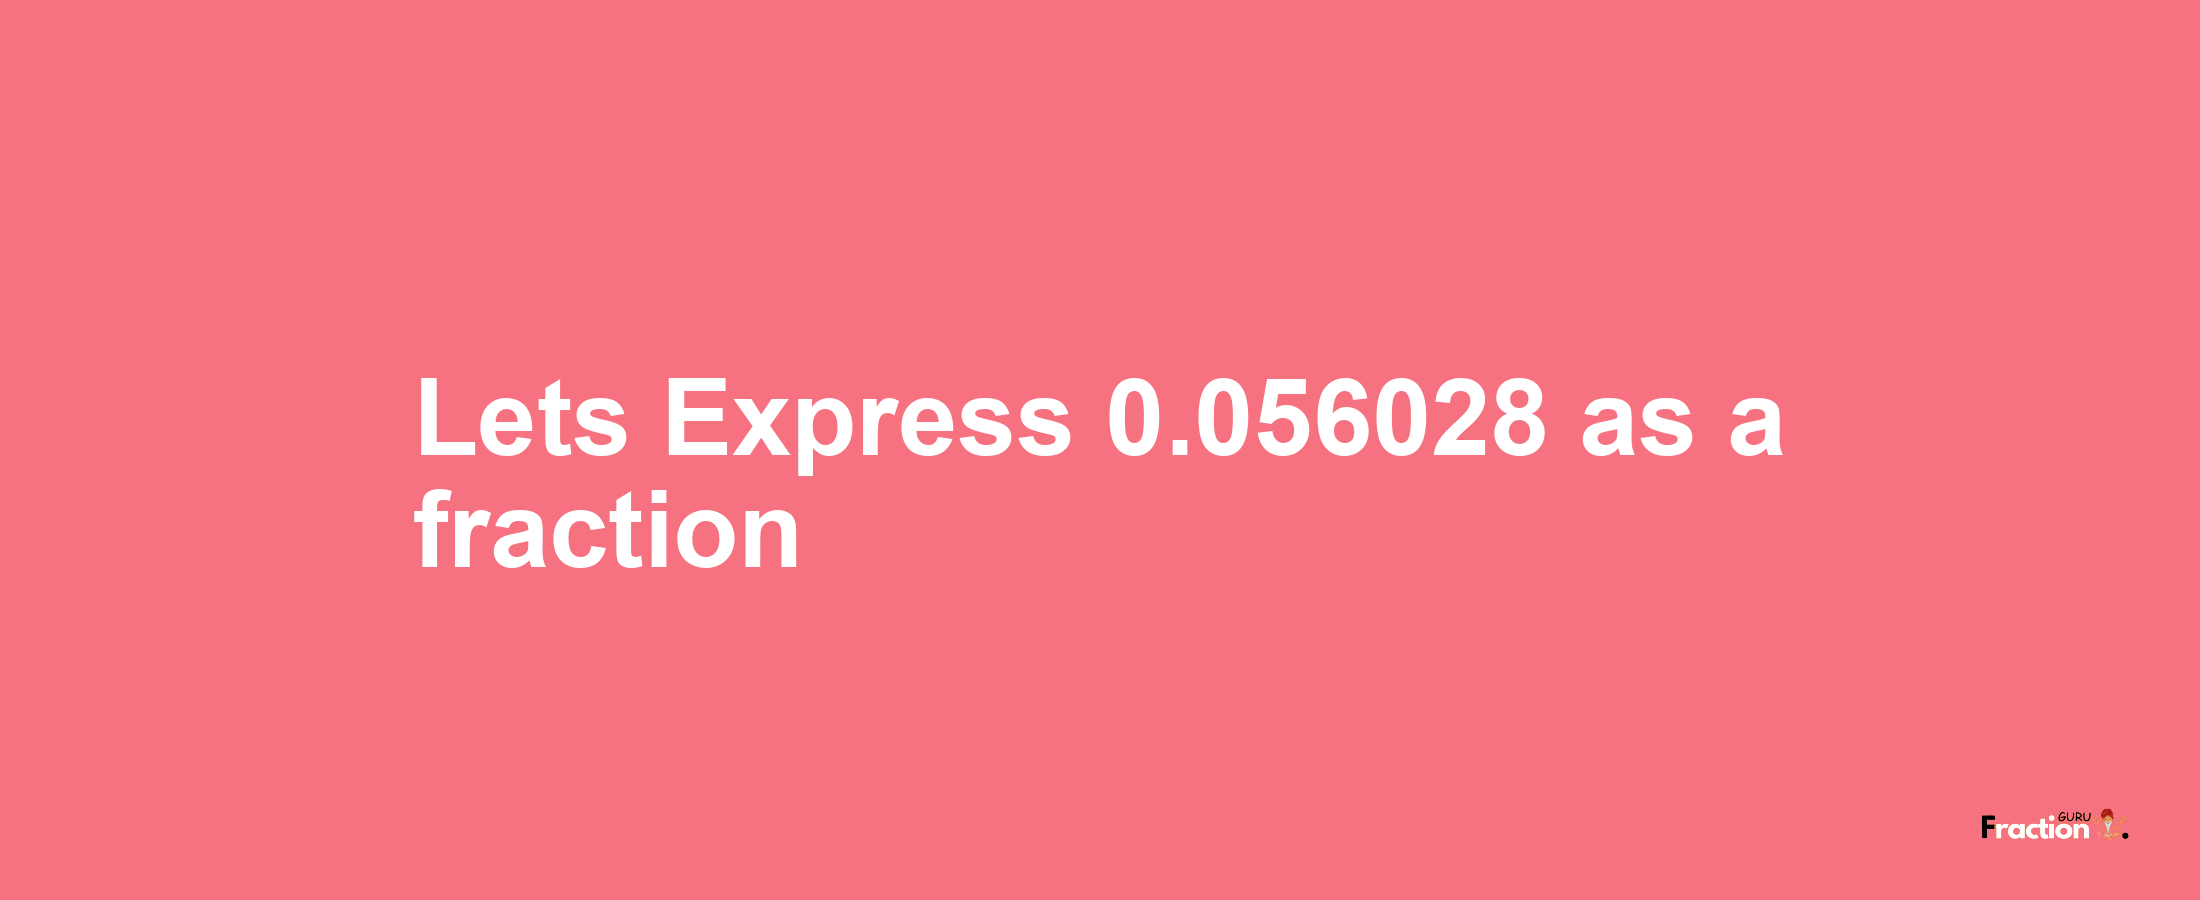 Lets Express 0.056028 as afraction